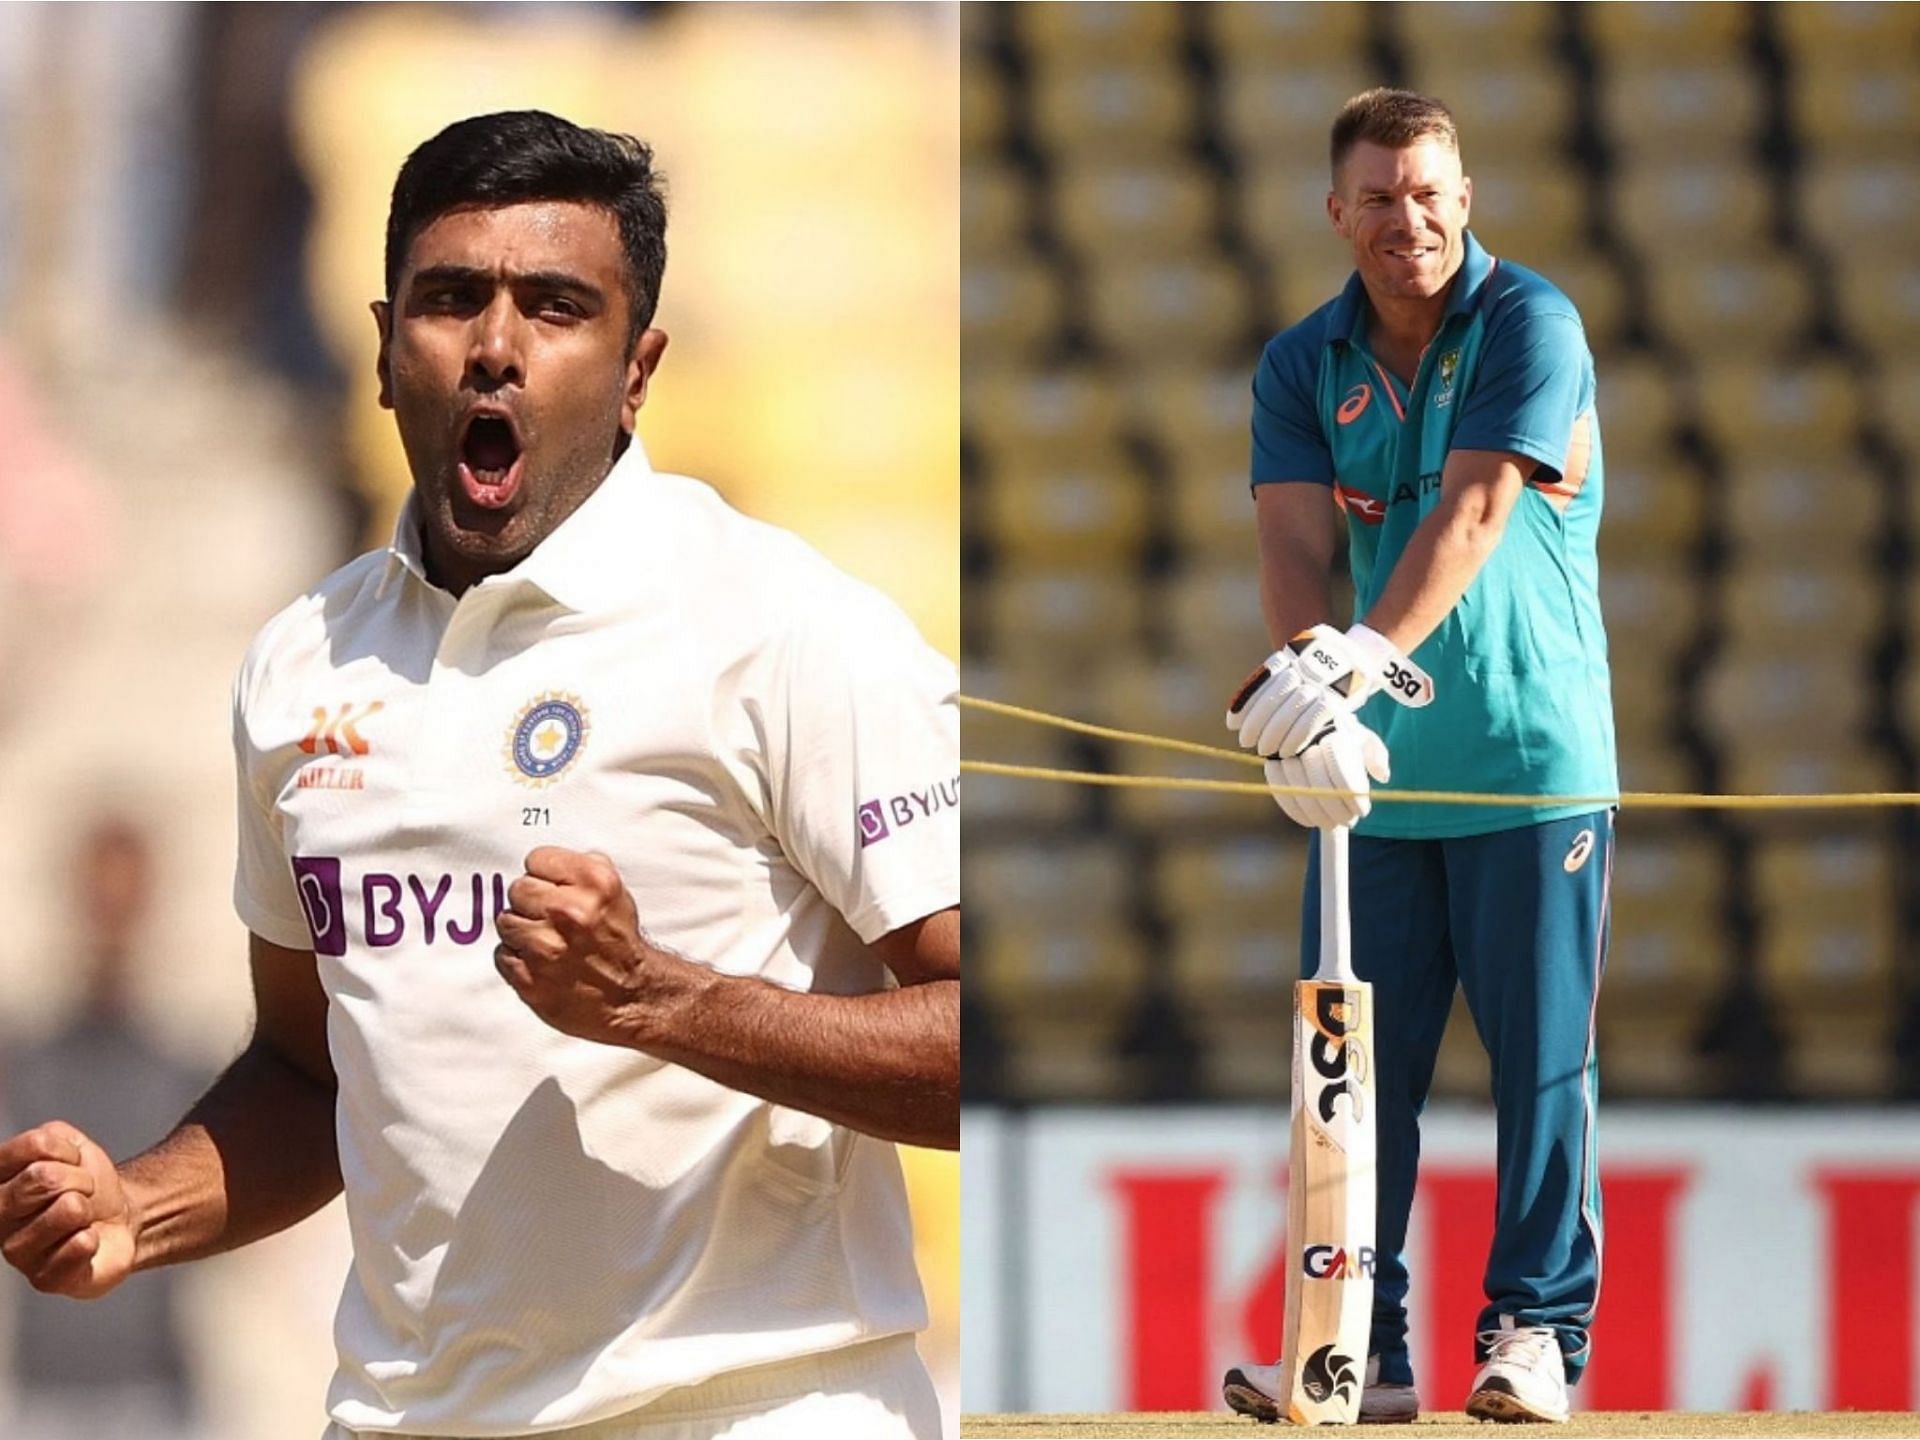 Ravichandran Ashwin has been an arch nemesis for David Warner (R) over the years [Pic Credit: Getty Images]